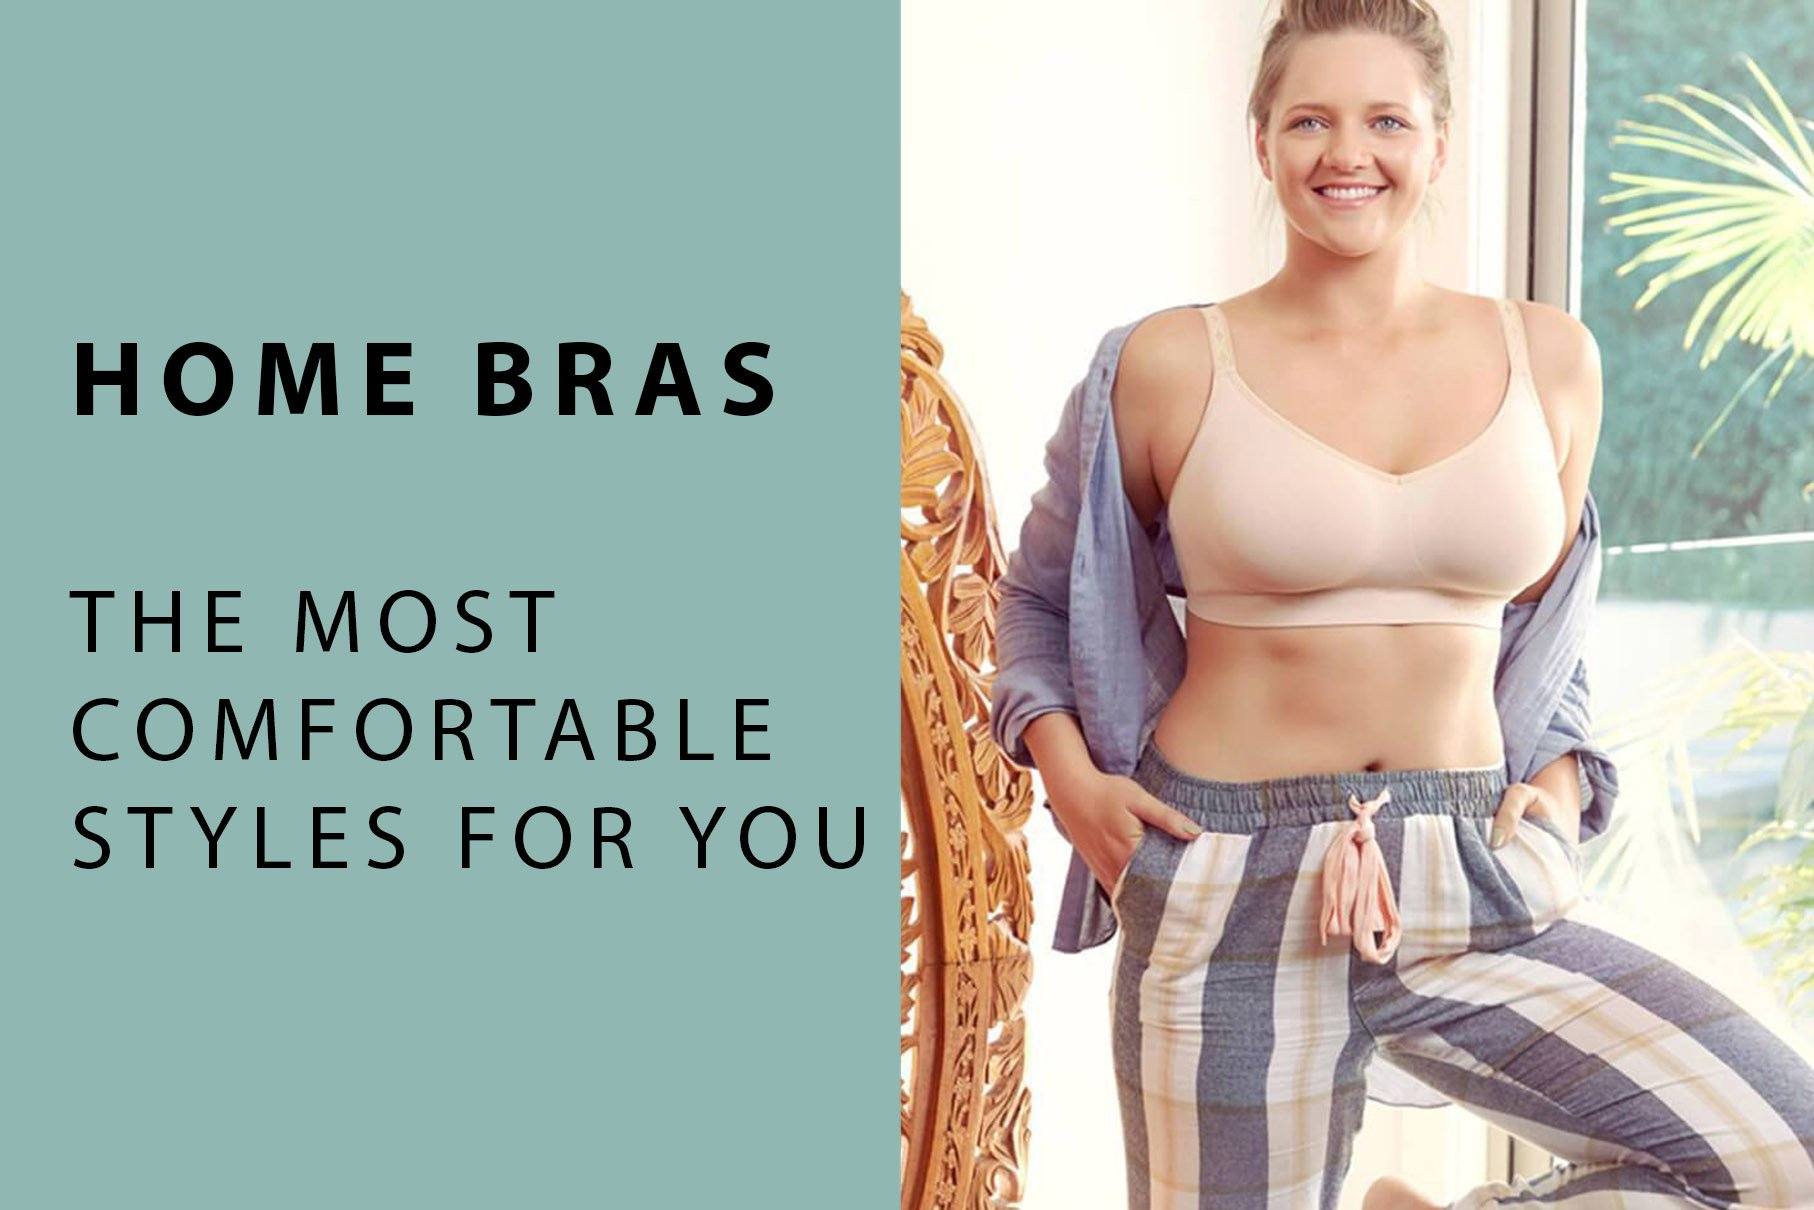 Comfort Bras - The Best Wire-Free Bras for Maximum Comfort AND